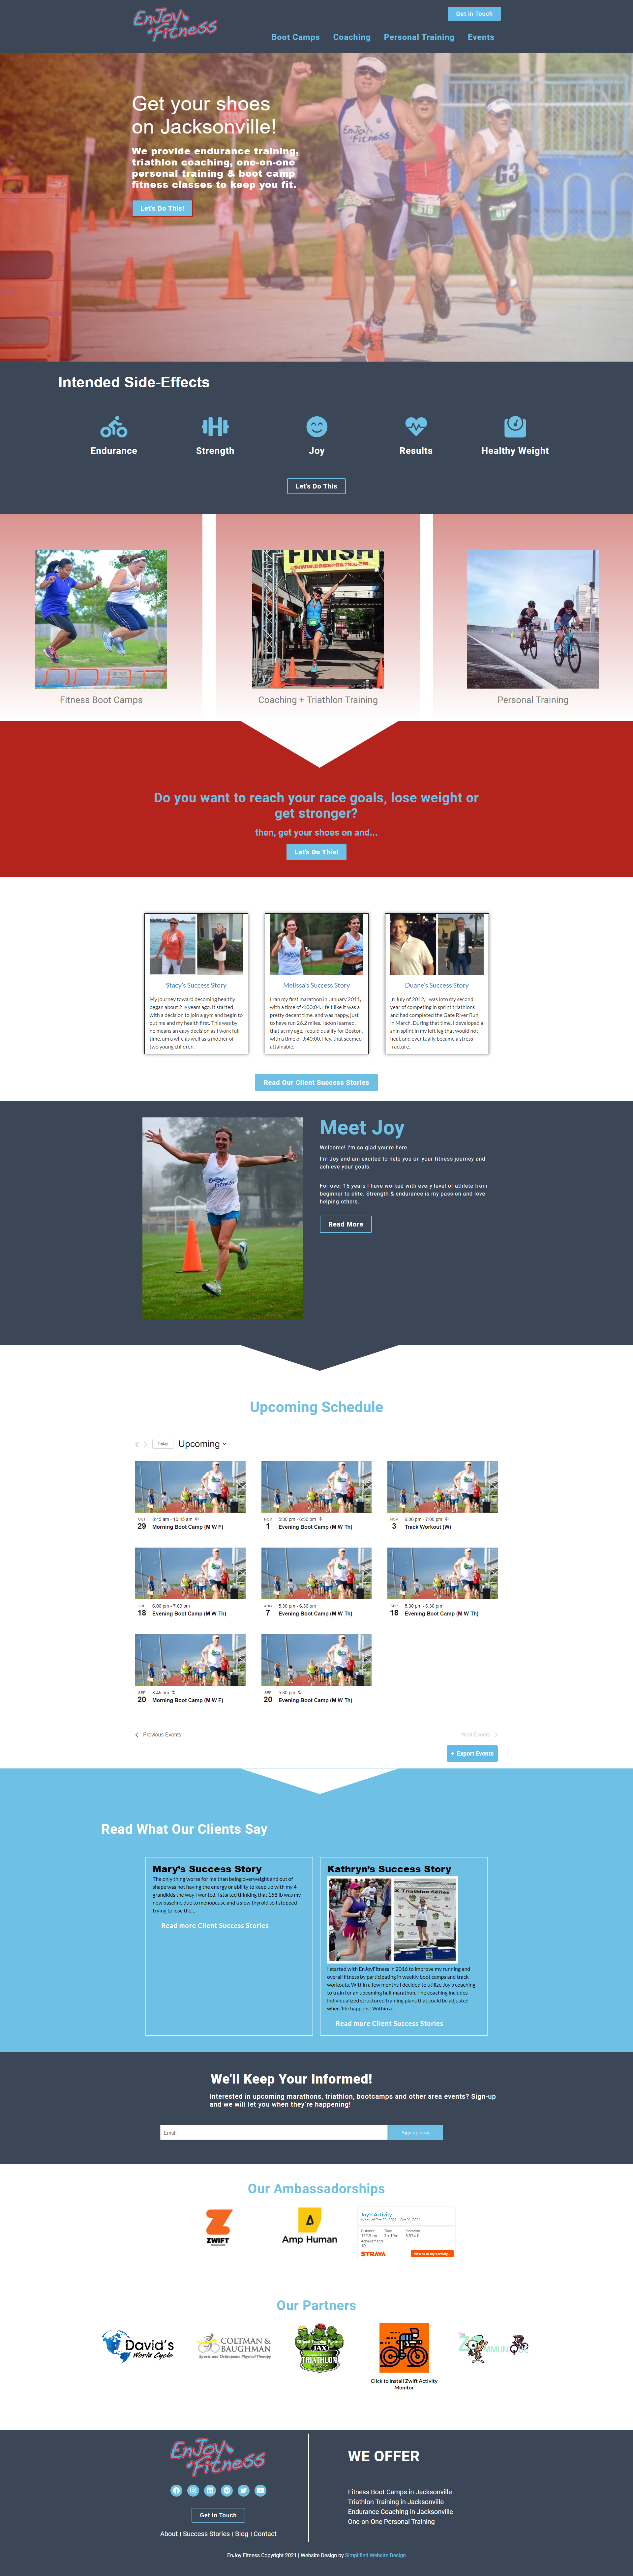 Example of website design for fitness instructors